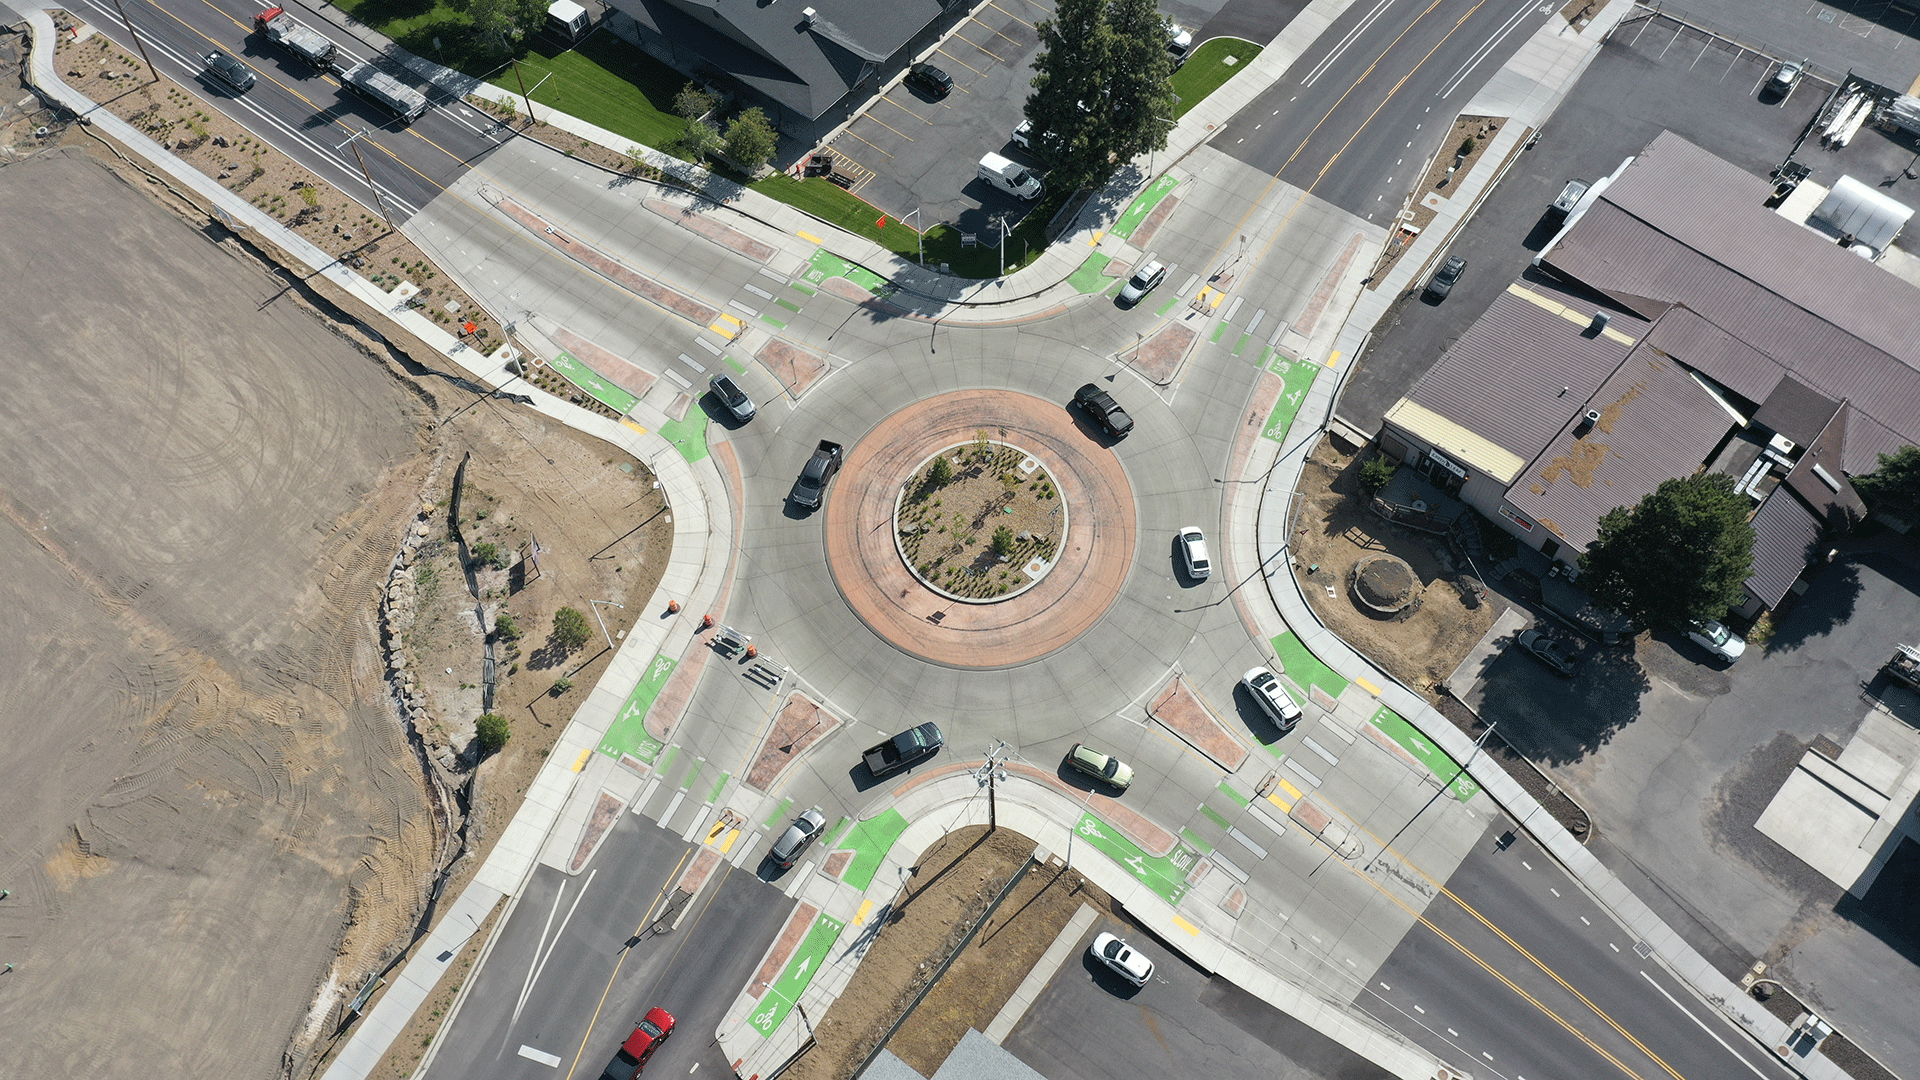 Bike-protected roundabout in Bend, Oregon.